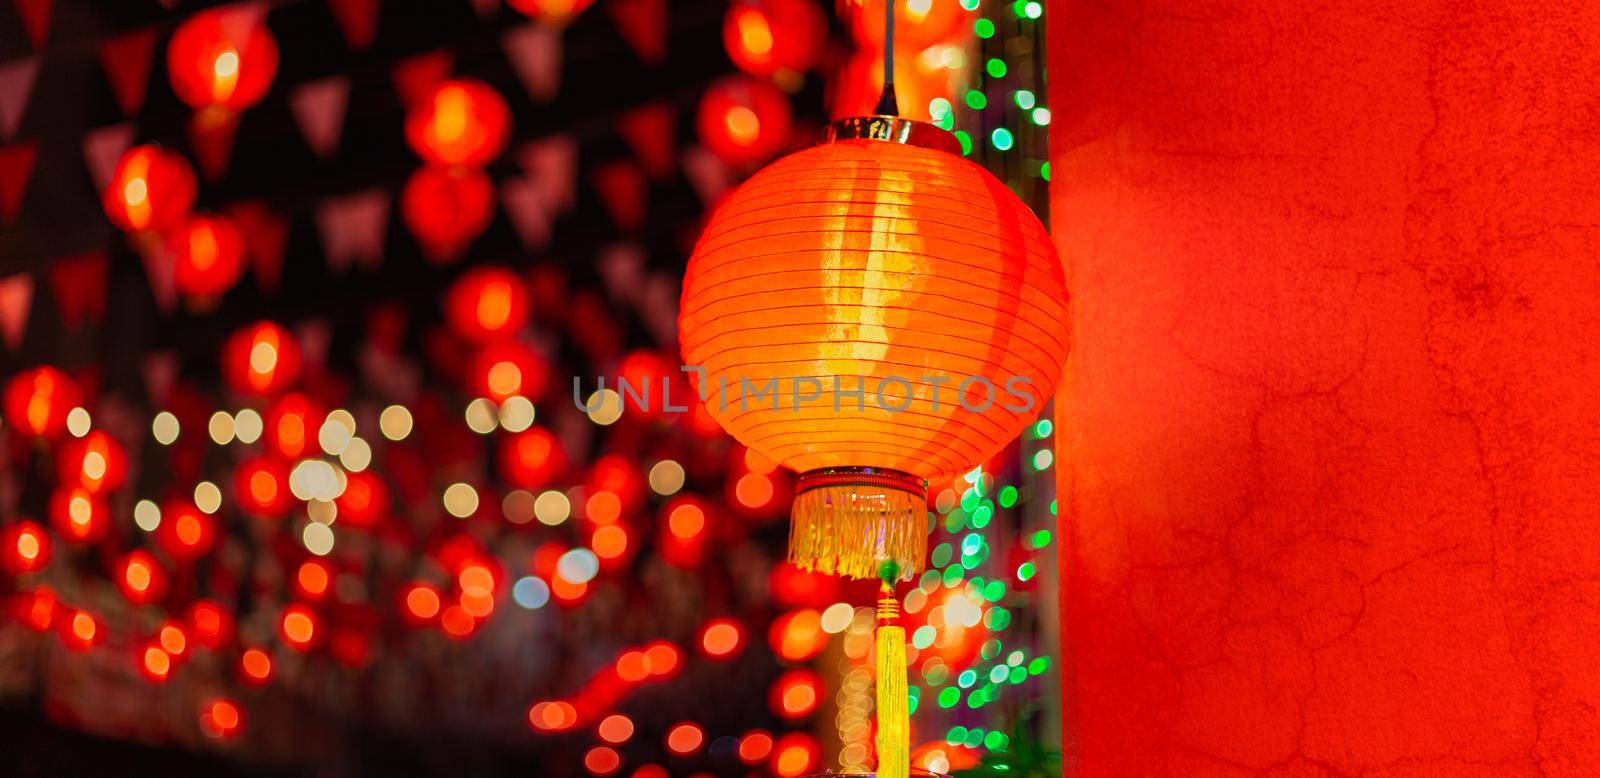 Chinese new year lanterns in chinatown. by toa55